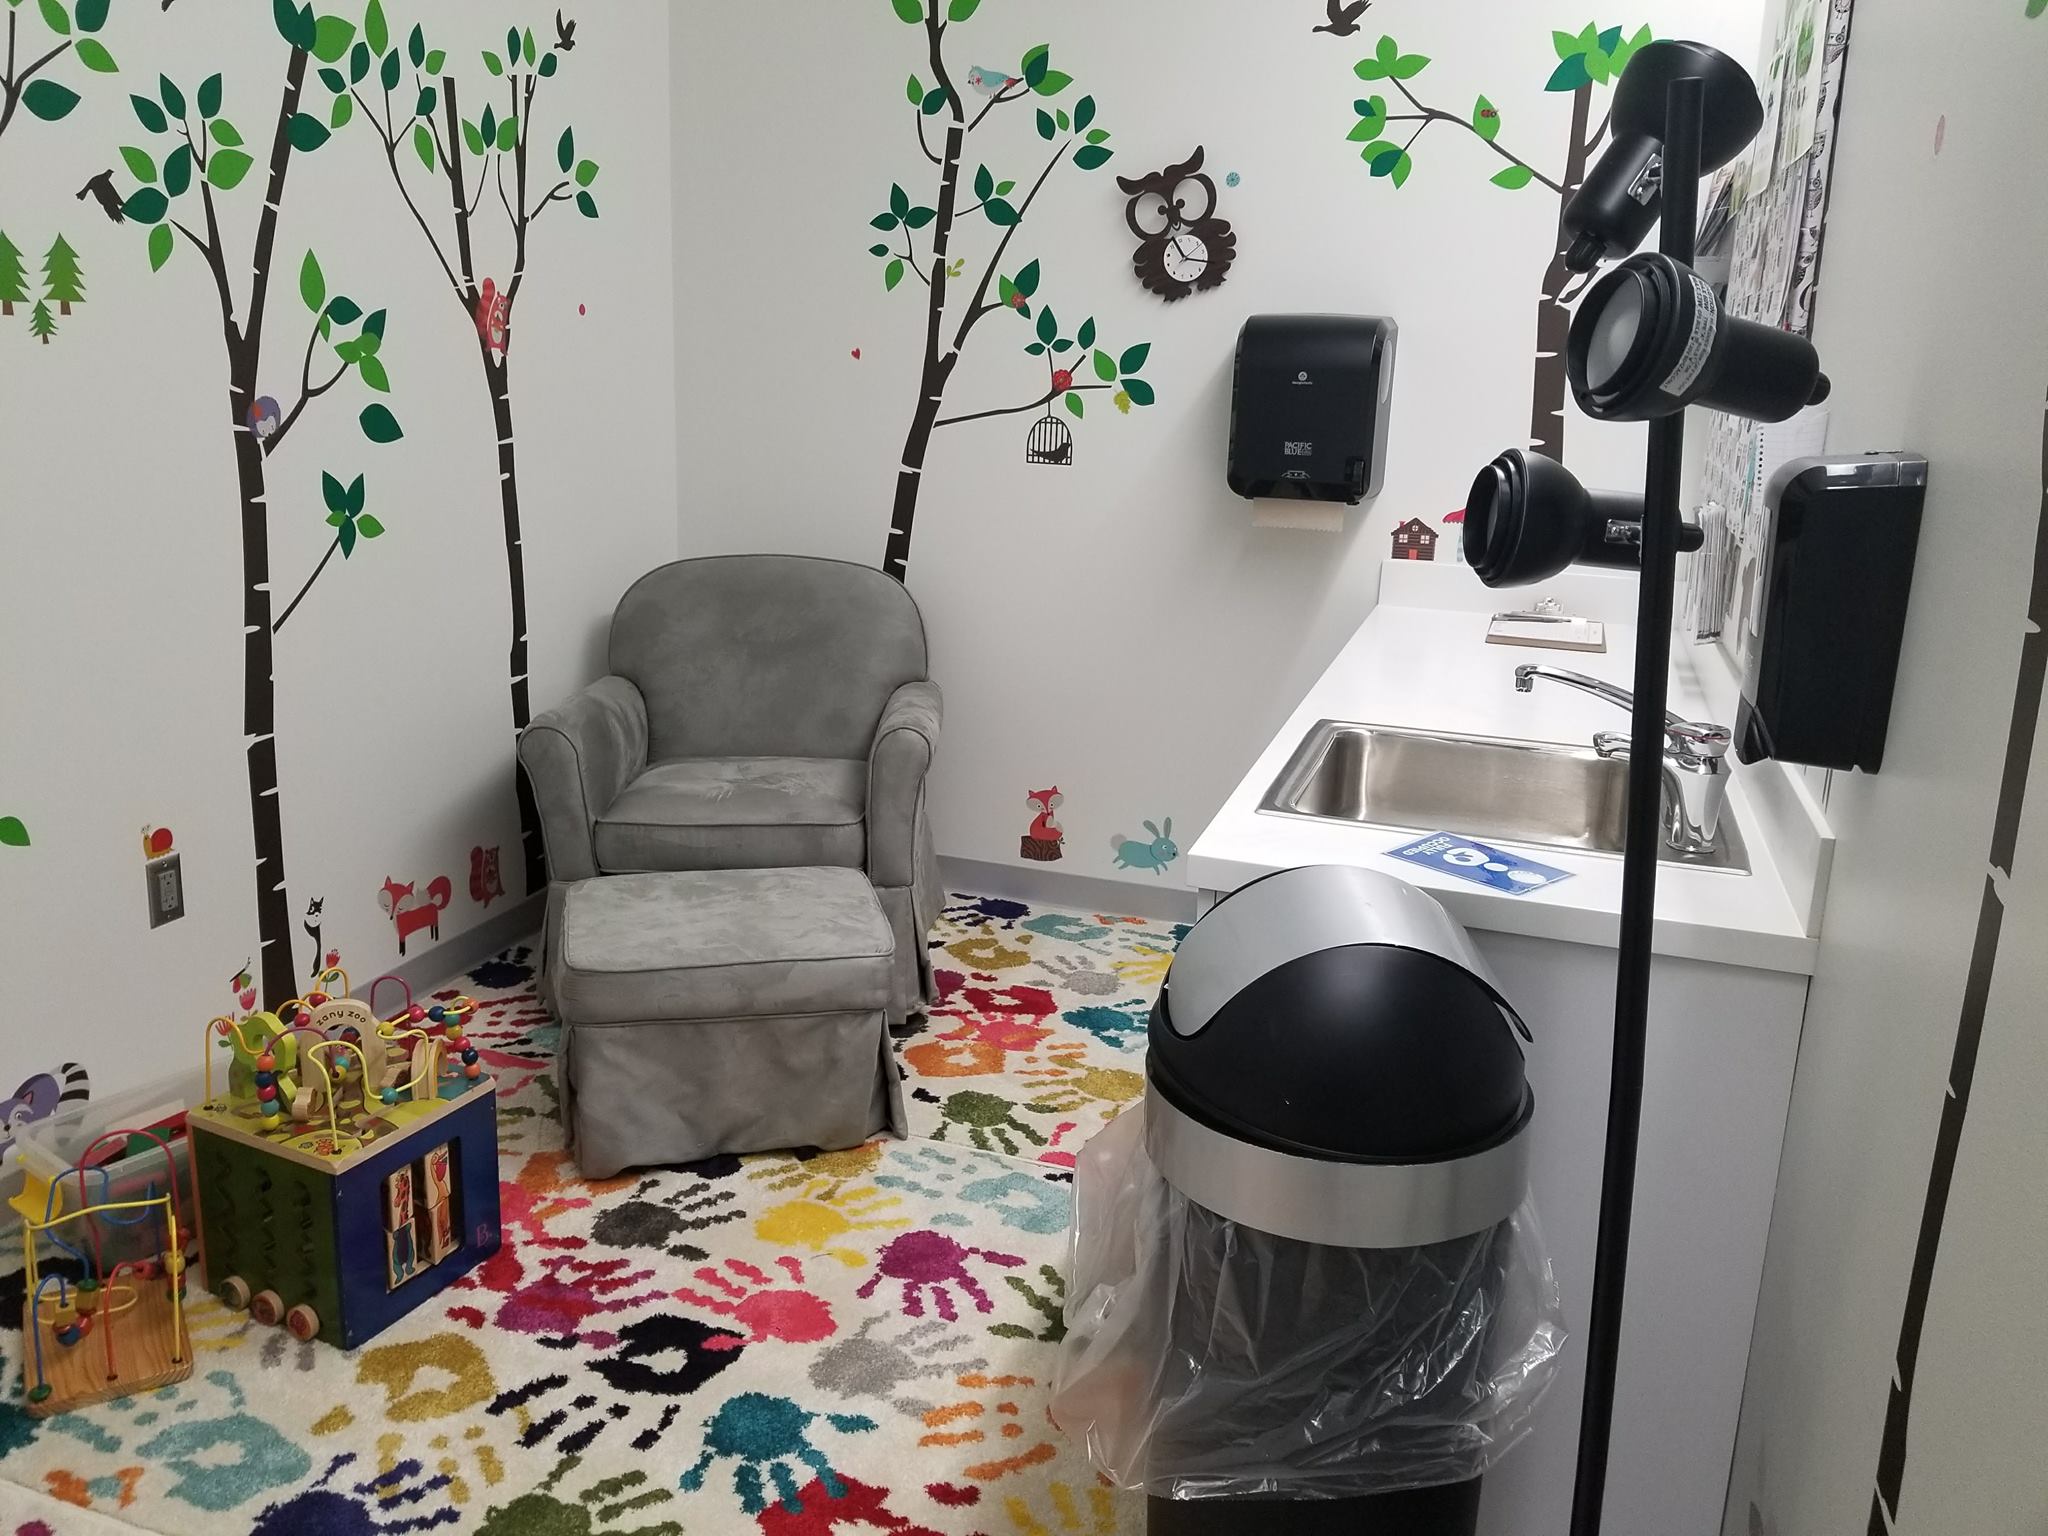 Lactation room equipped with a chair, foot rest, sink, trashcan, and children's toys.